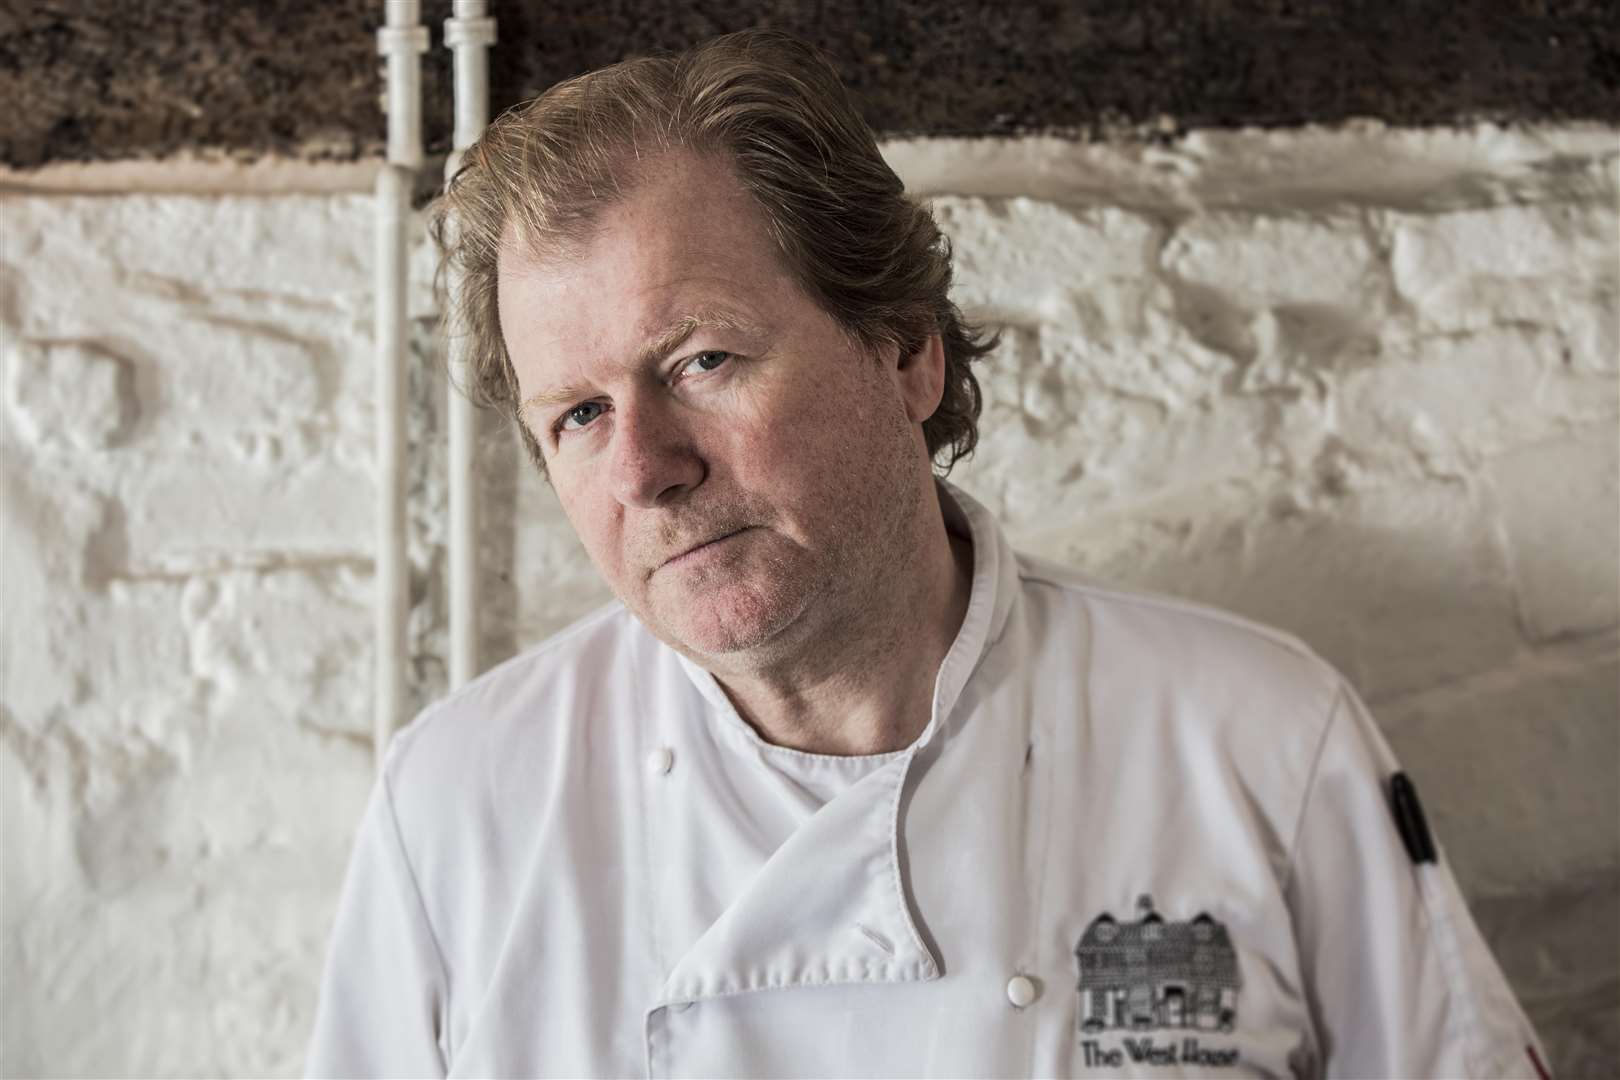 Michelin star chef, Graham Garrett, has started a fundraising initiative at his restaurant next to the affected homes. (6115262)